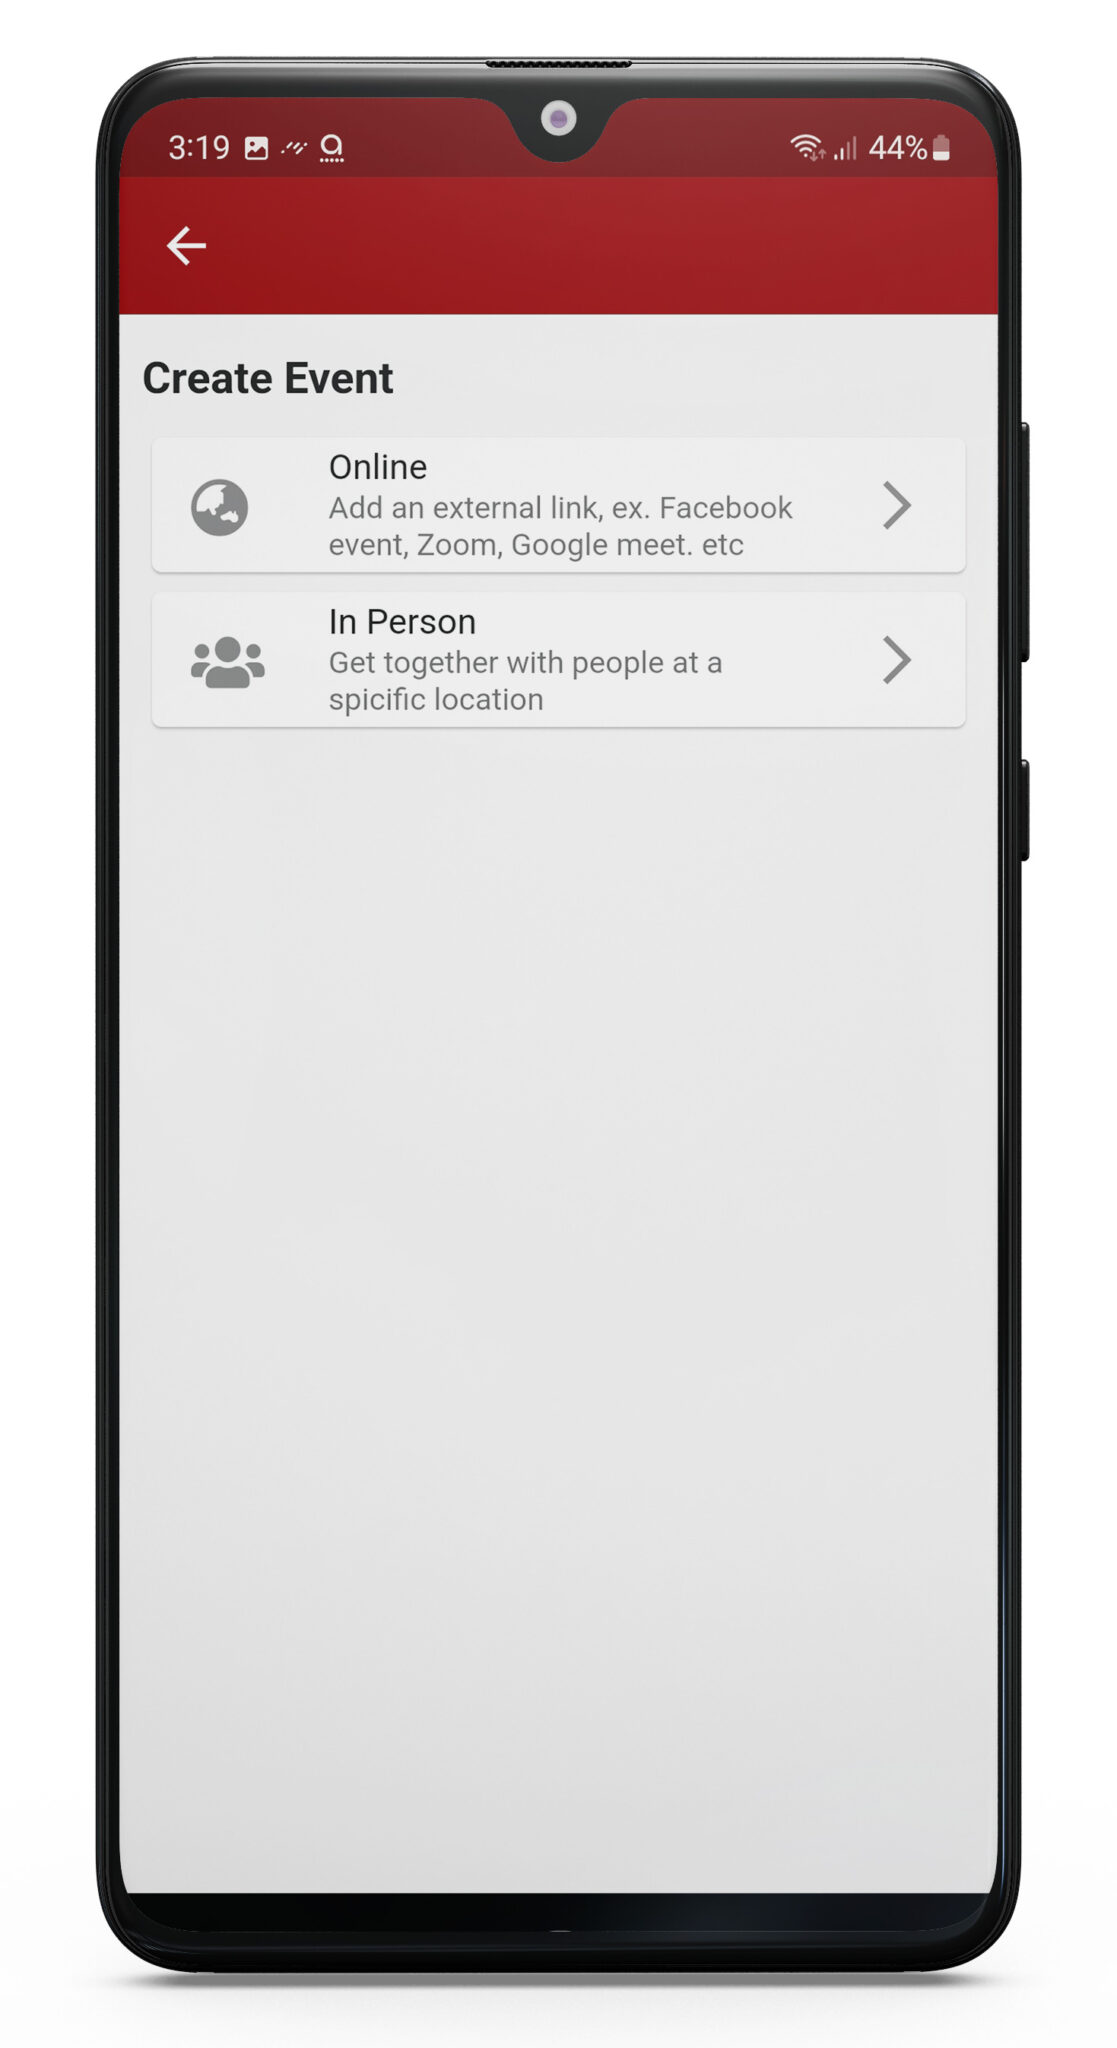 Screen showing two options to create and share events on the RANGGO App